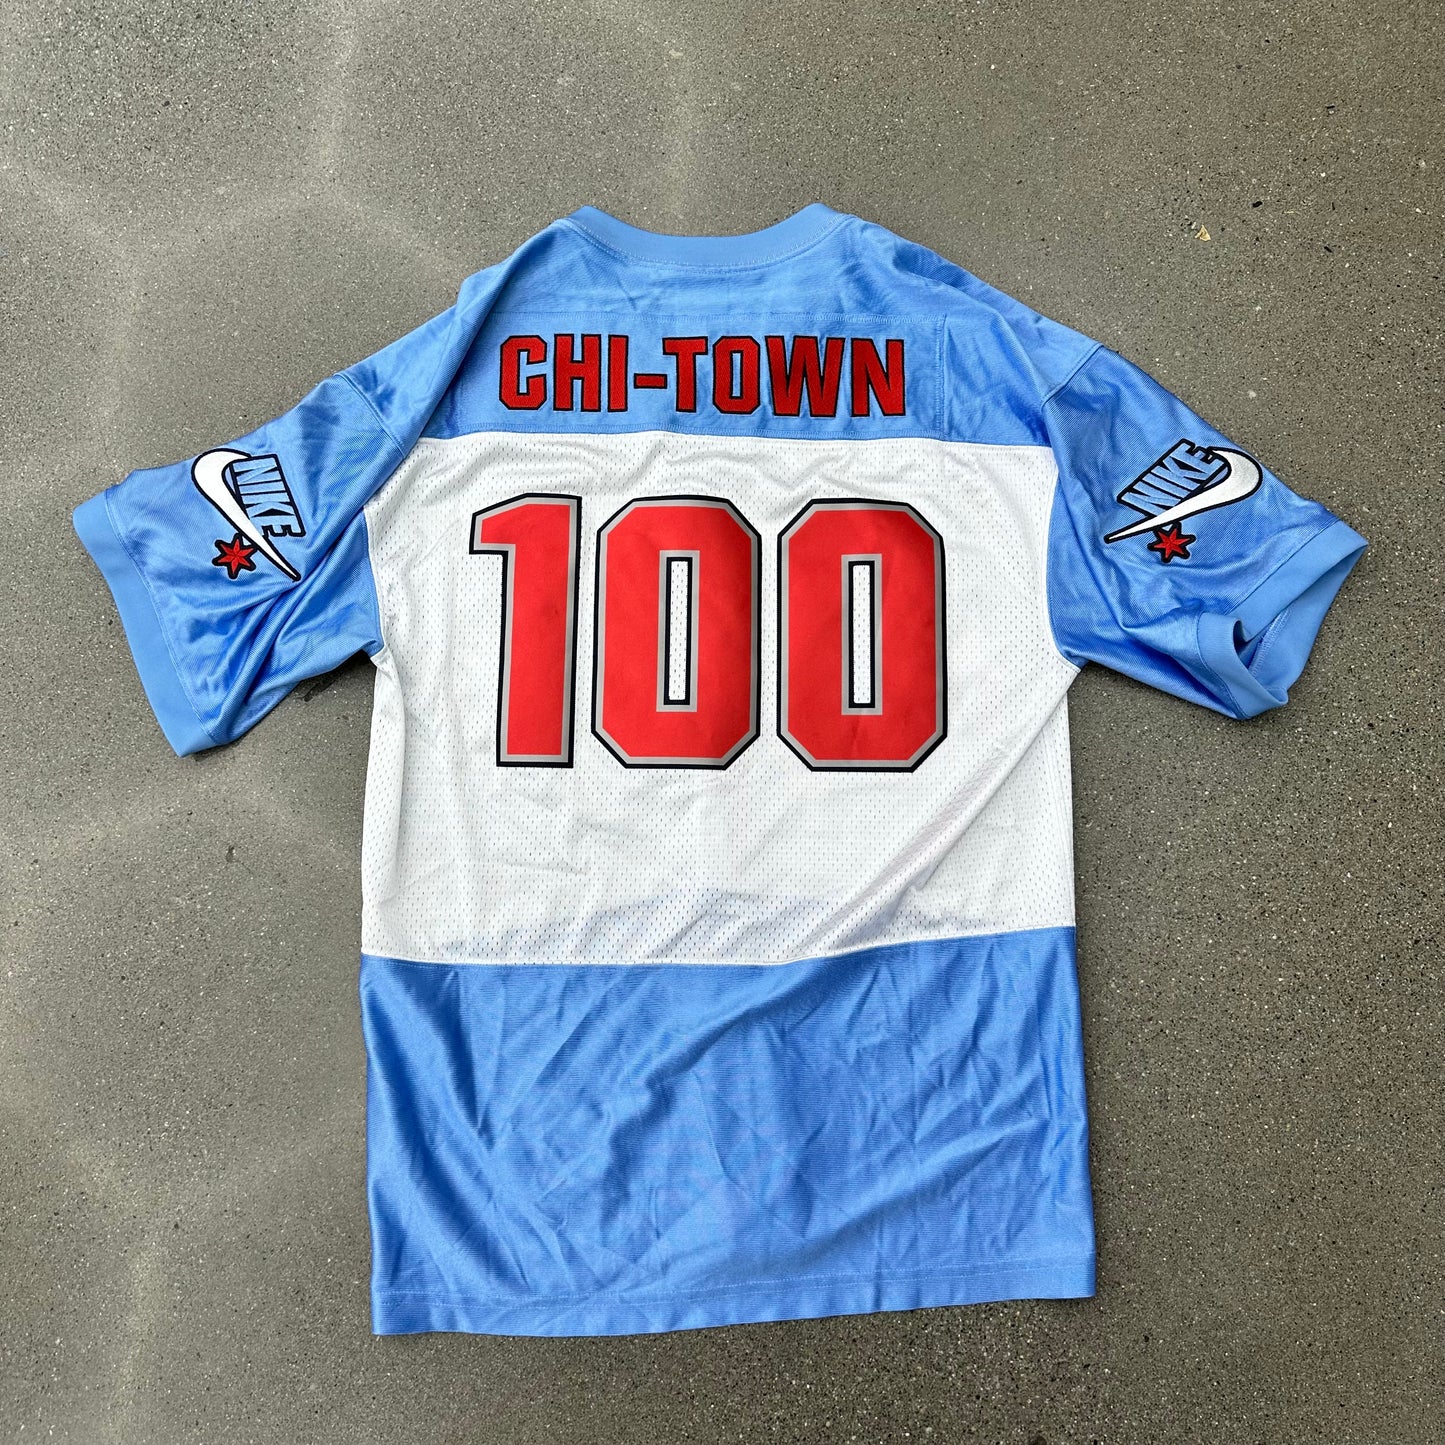 Chicago Chi-Town Football Jersey SZ M (NEW)